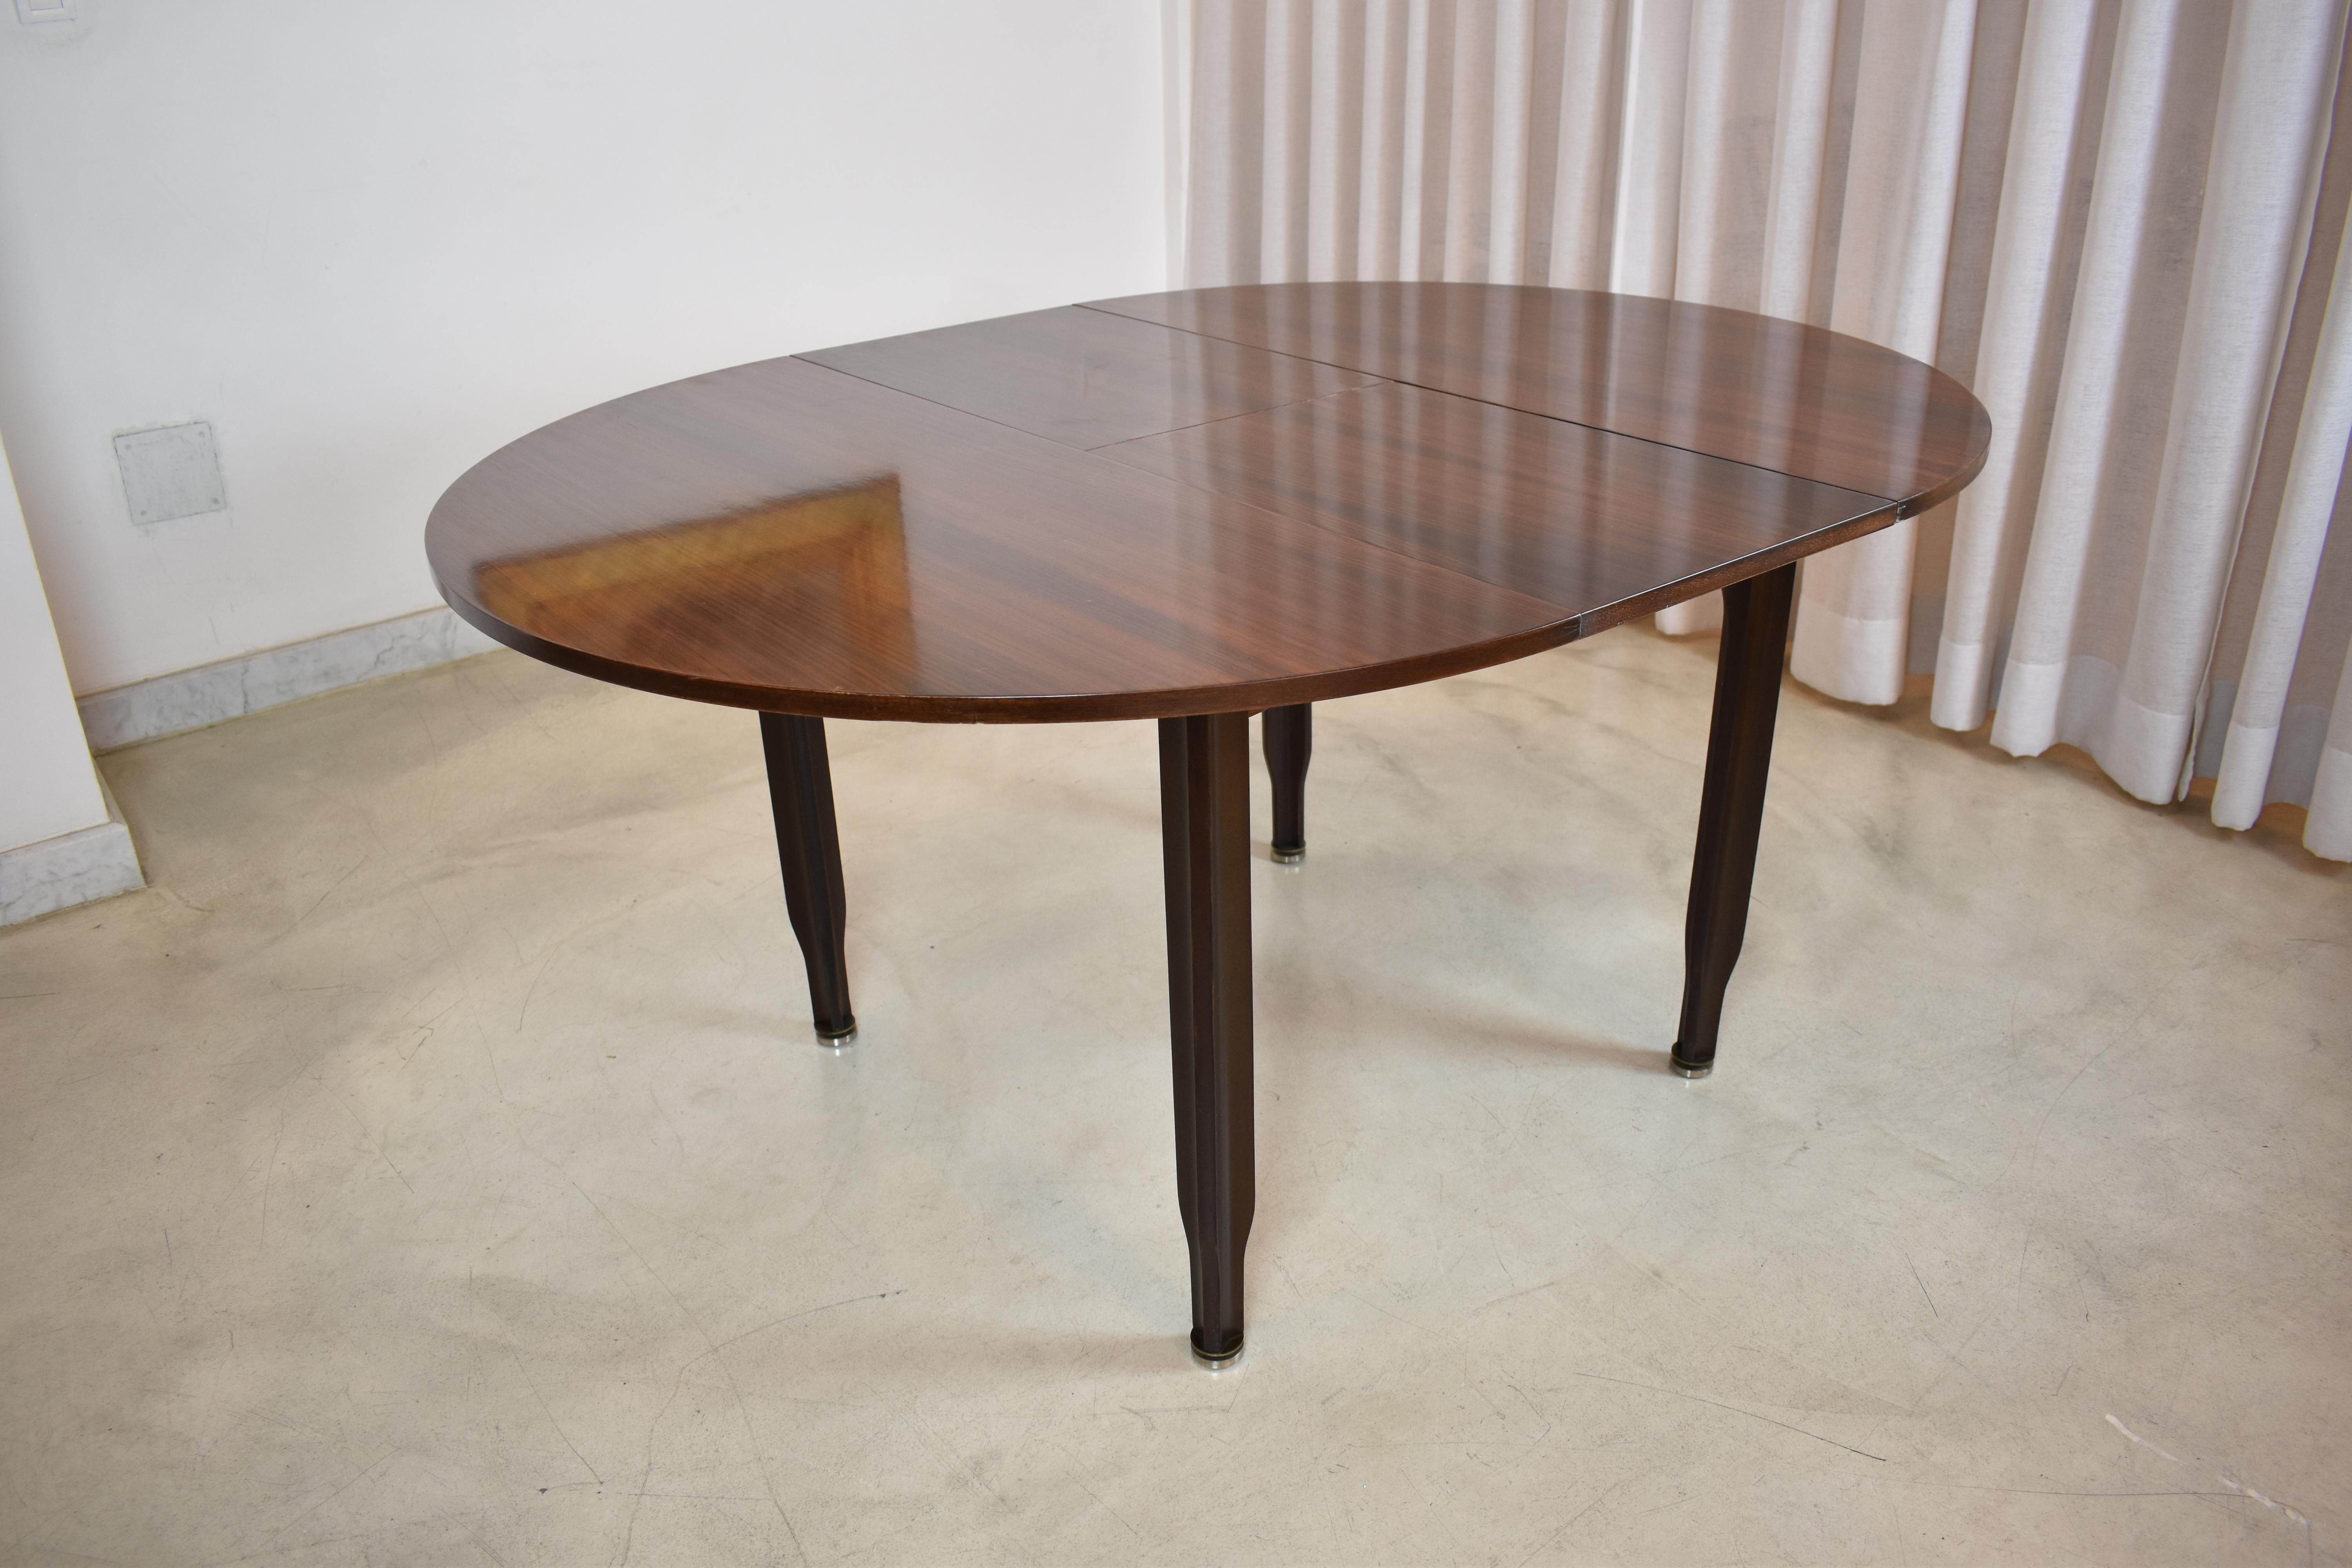 A stunning Italian vintage round extendable dining table composed of solid noble hardwood with a deep, rich color and striking grain patterns. and highlighted by stylish metallic caps. 
This beautiful collectible piece had undergone impeccable